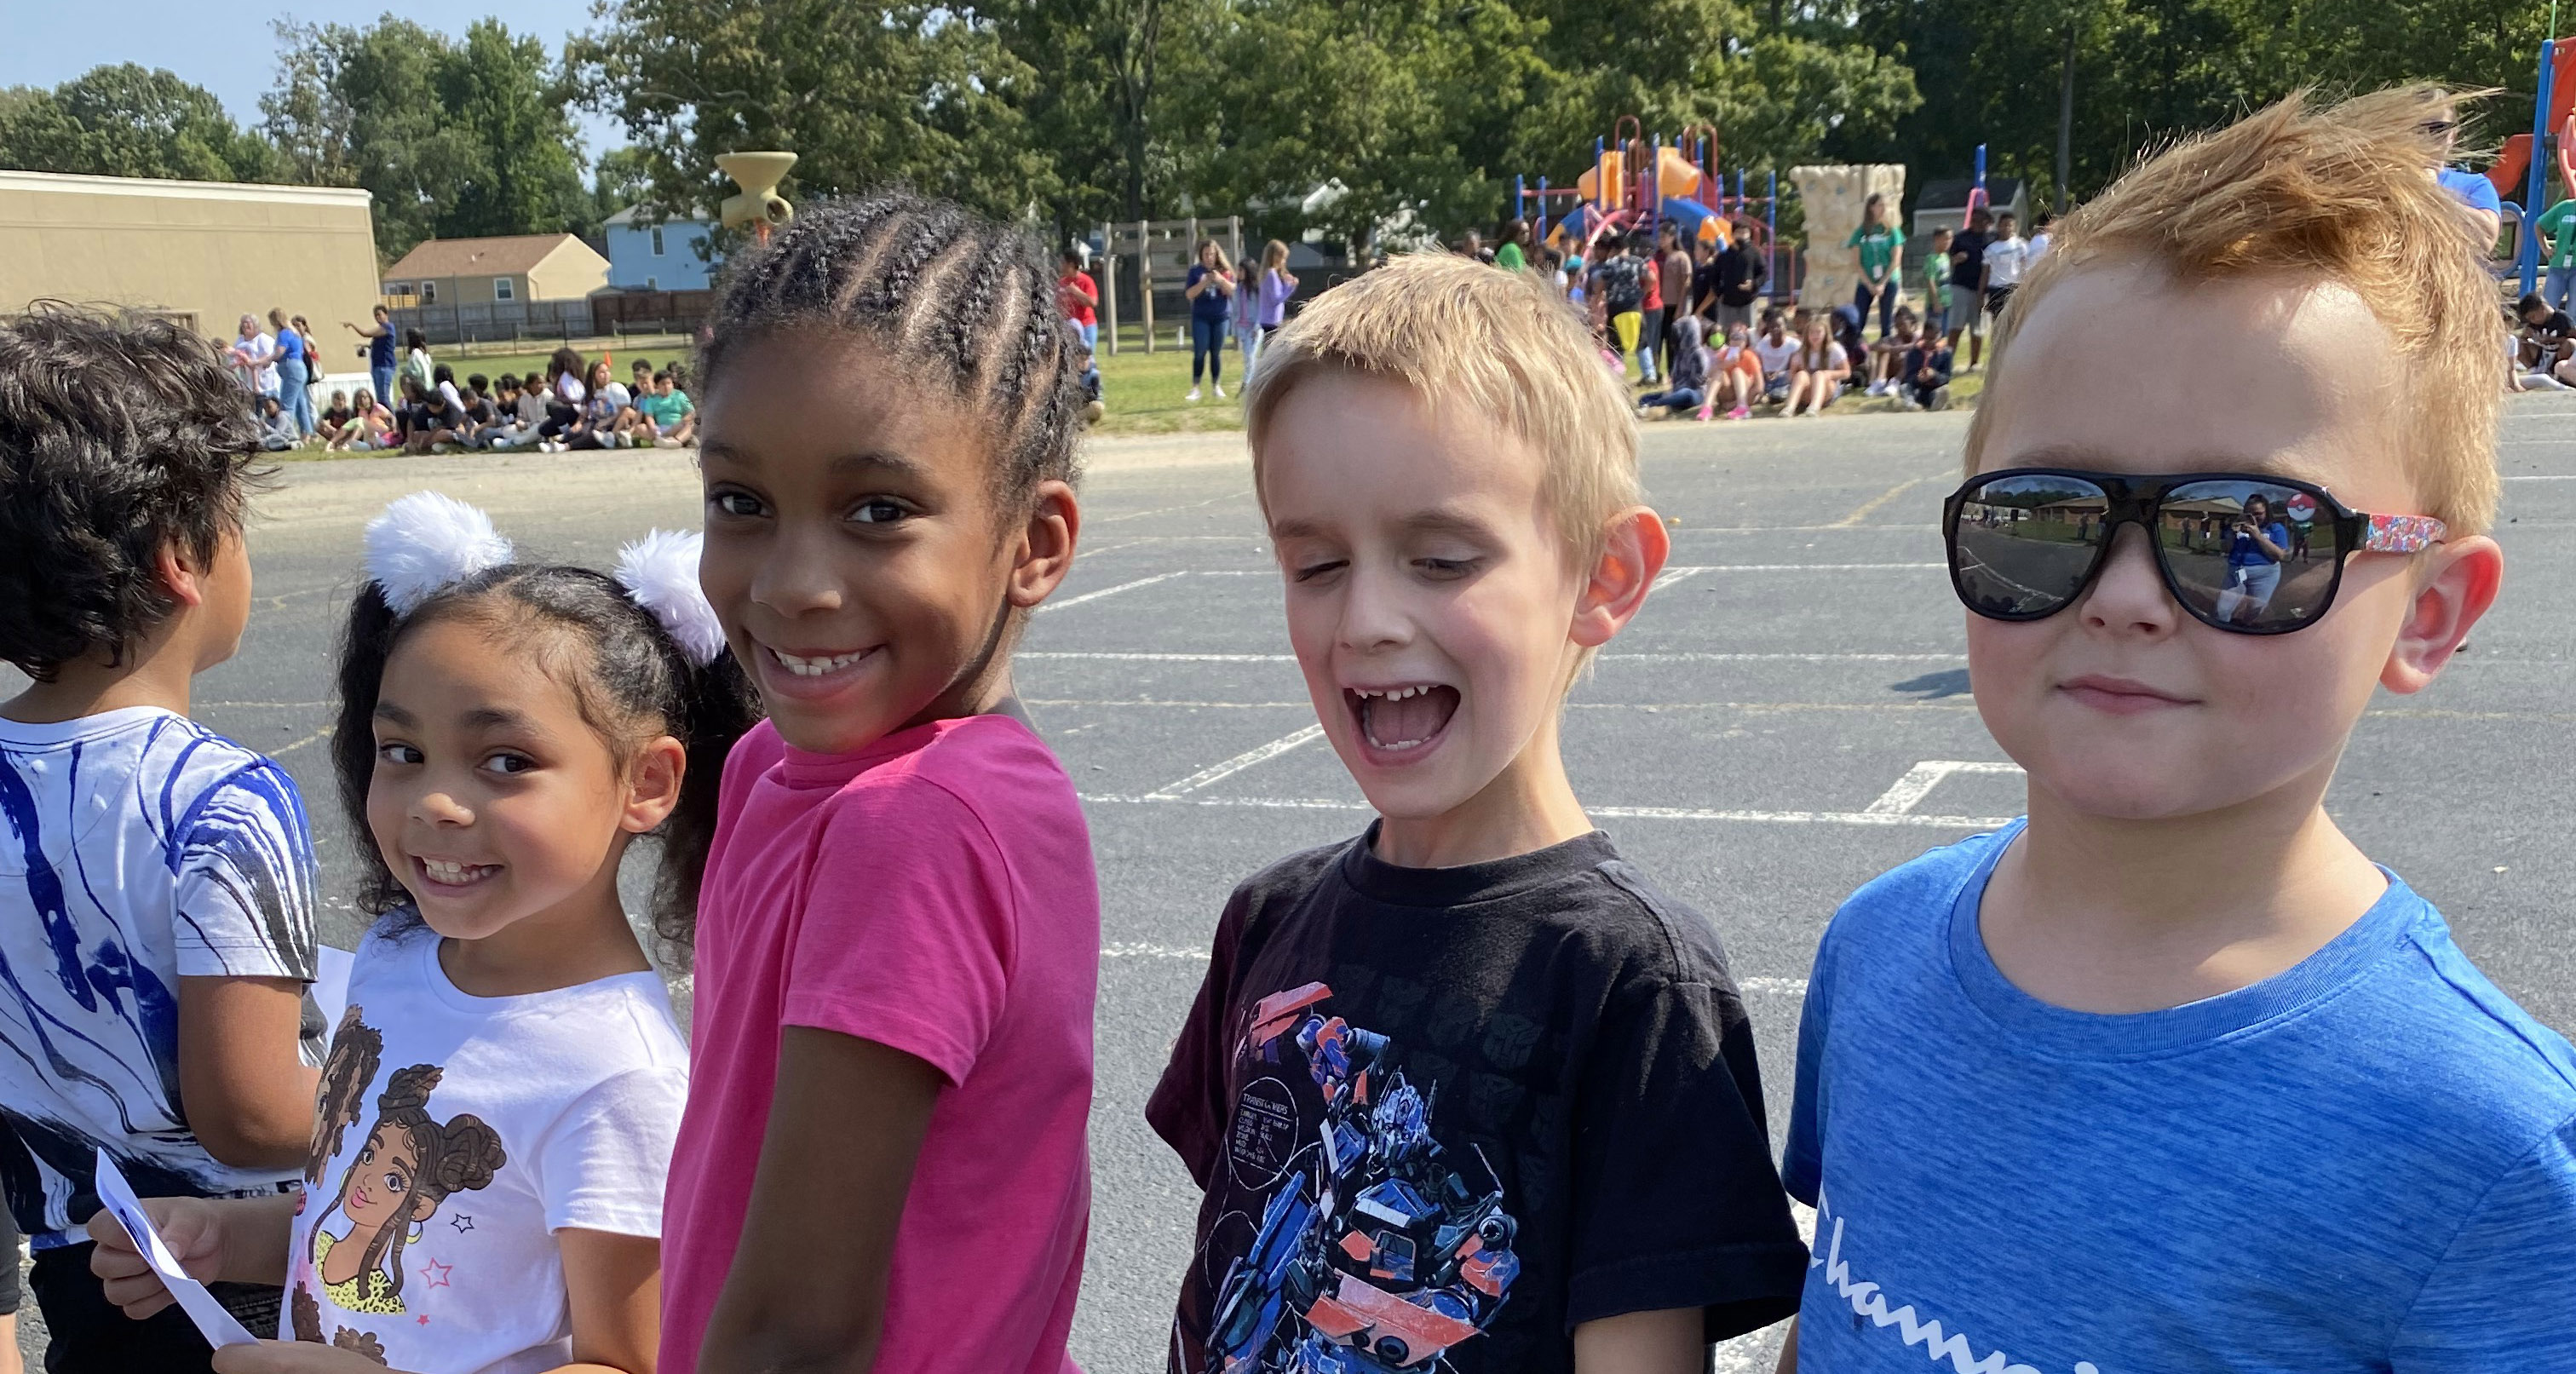 Four students smiling outside on the blacktop